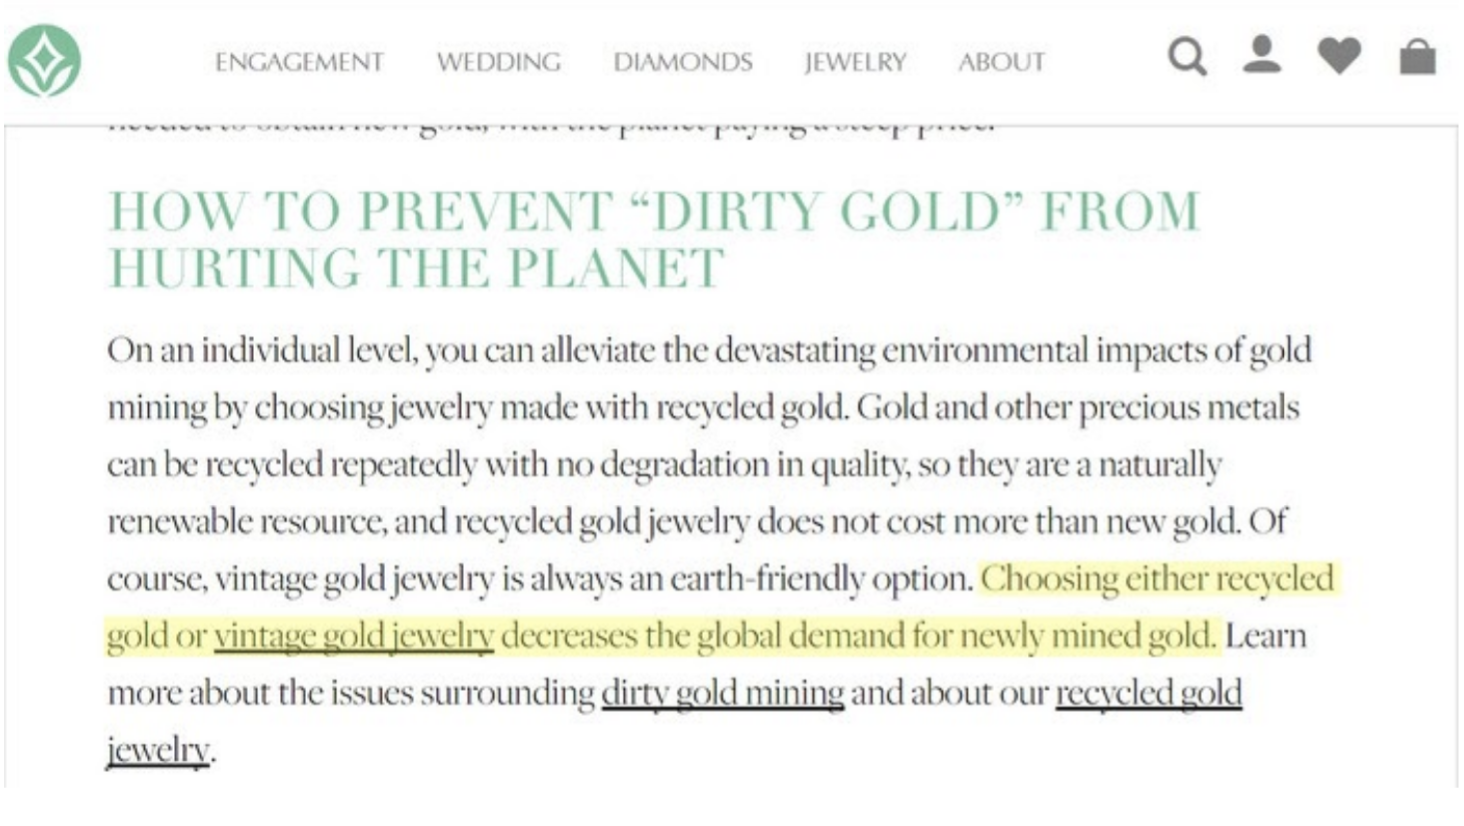 Brilliant Earth argues that recycled gold "decreases the global demand for newly-mined gold." I call BS.